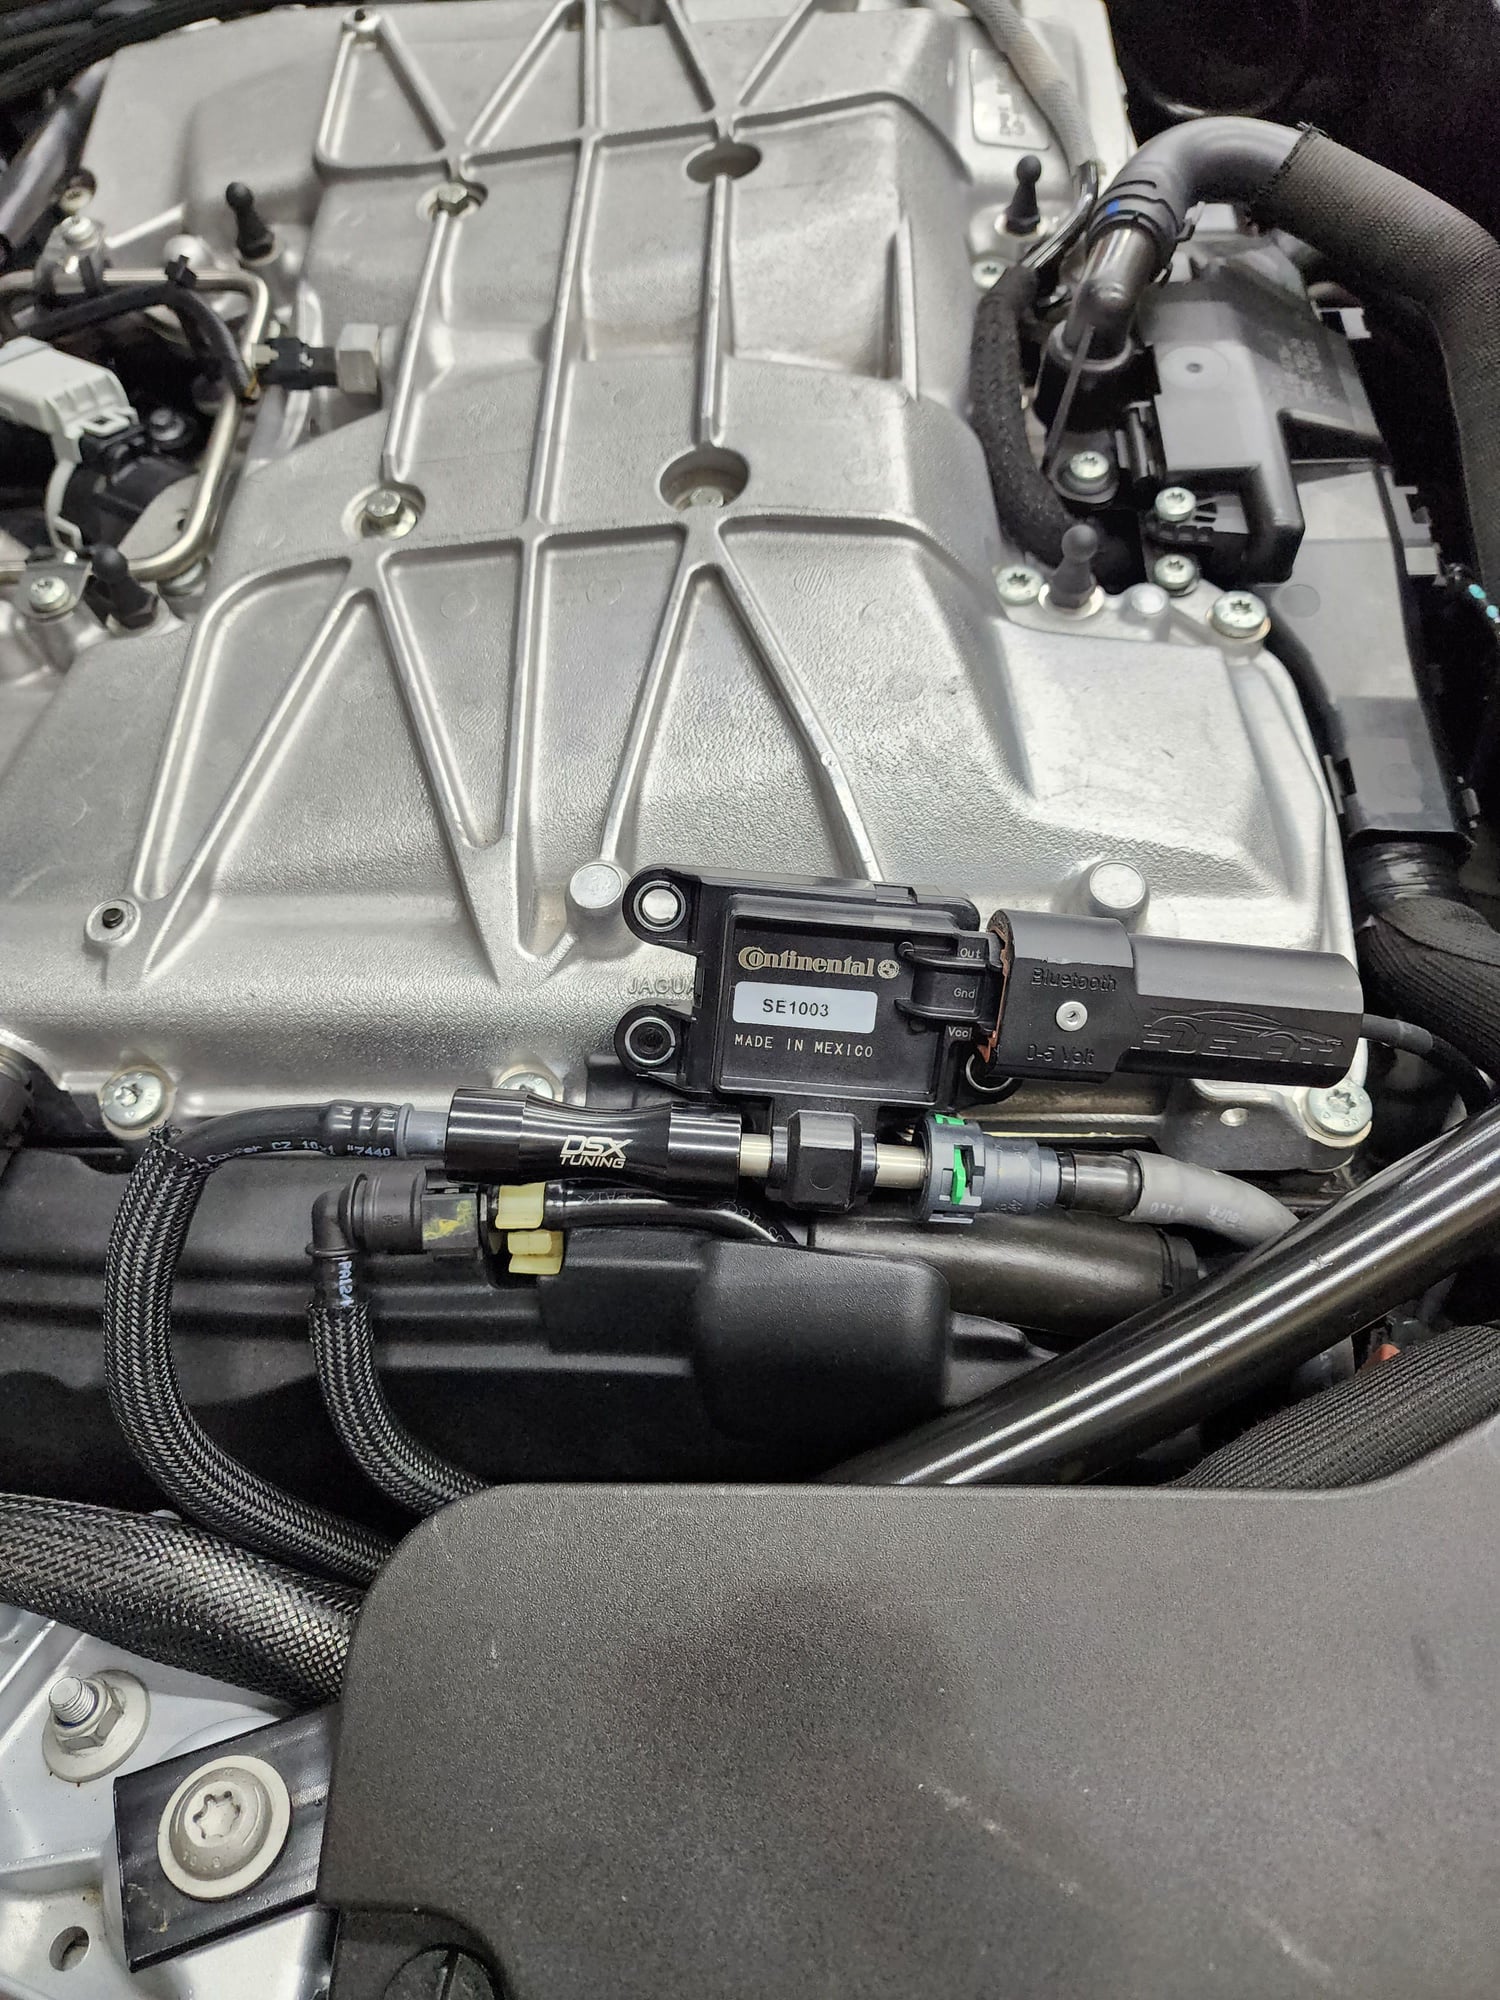 Engine - Power Adders - F type SVR parting out - Used - 2014 to 2020 Jaguar F-Type - Harker Heights, TX 76548, United States